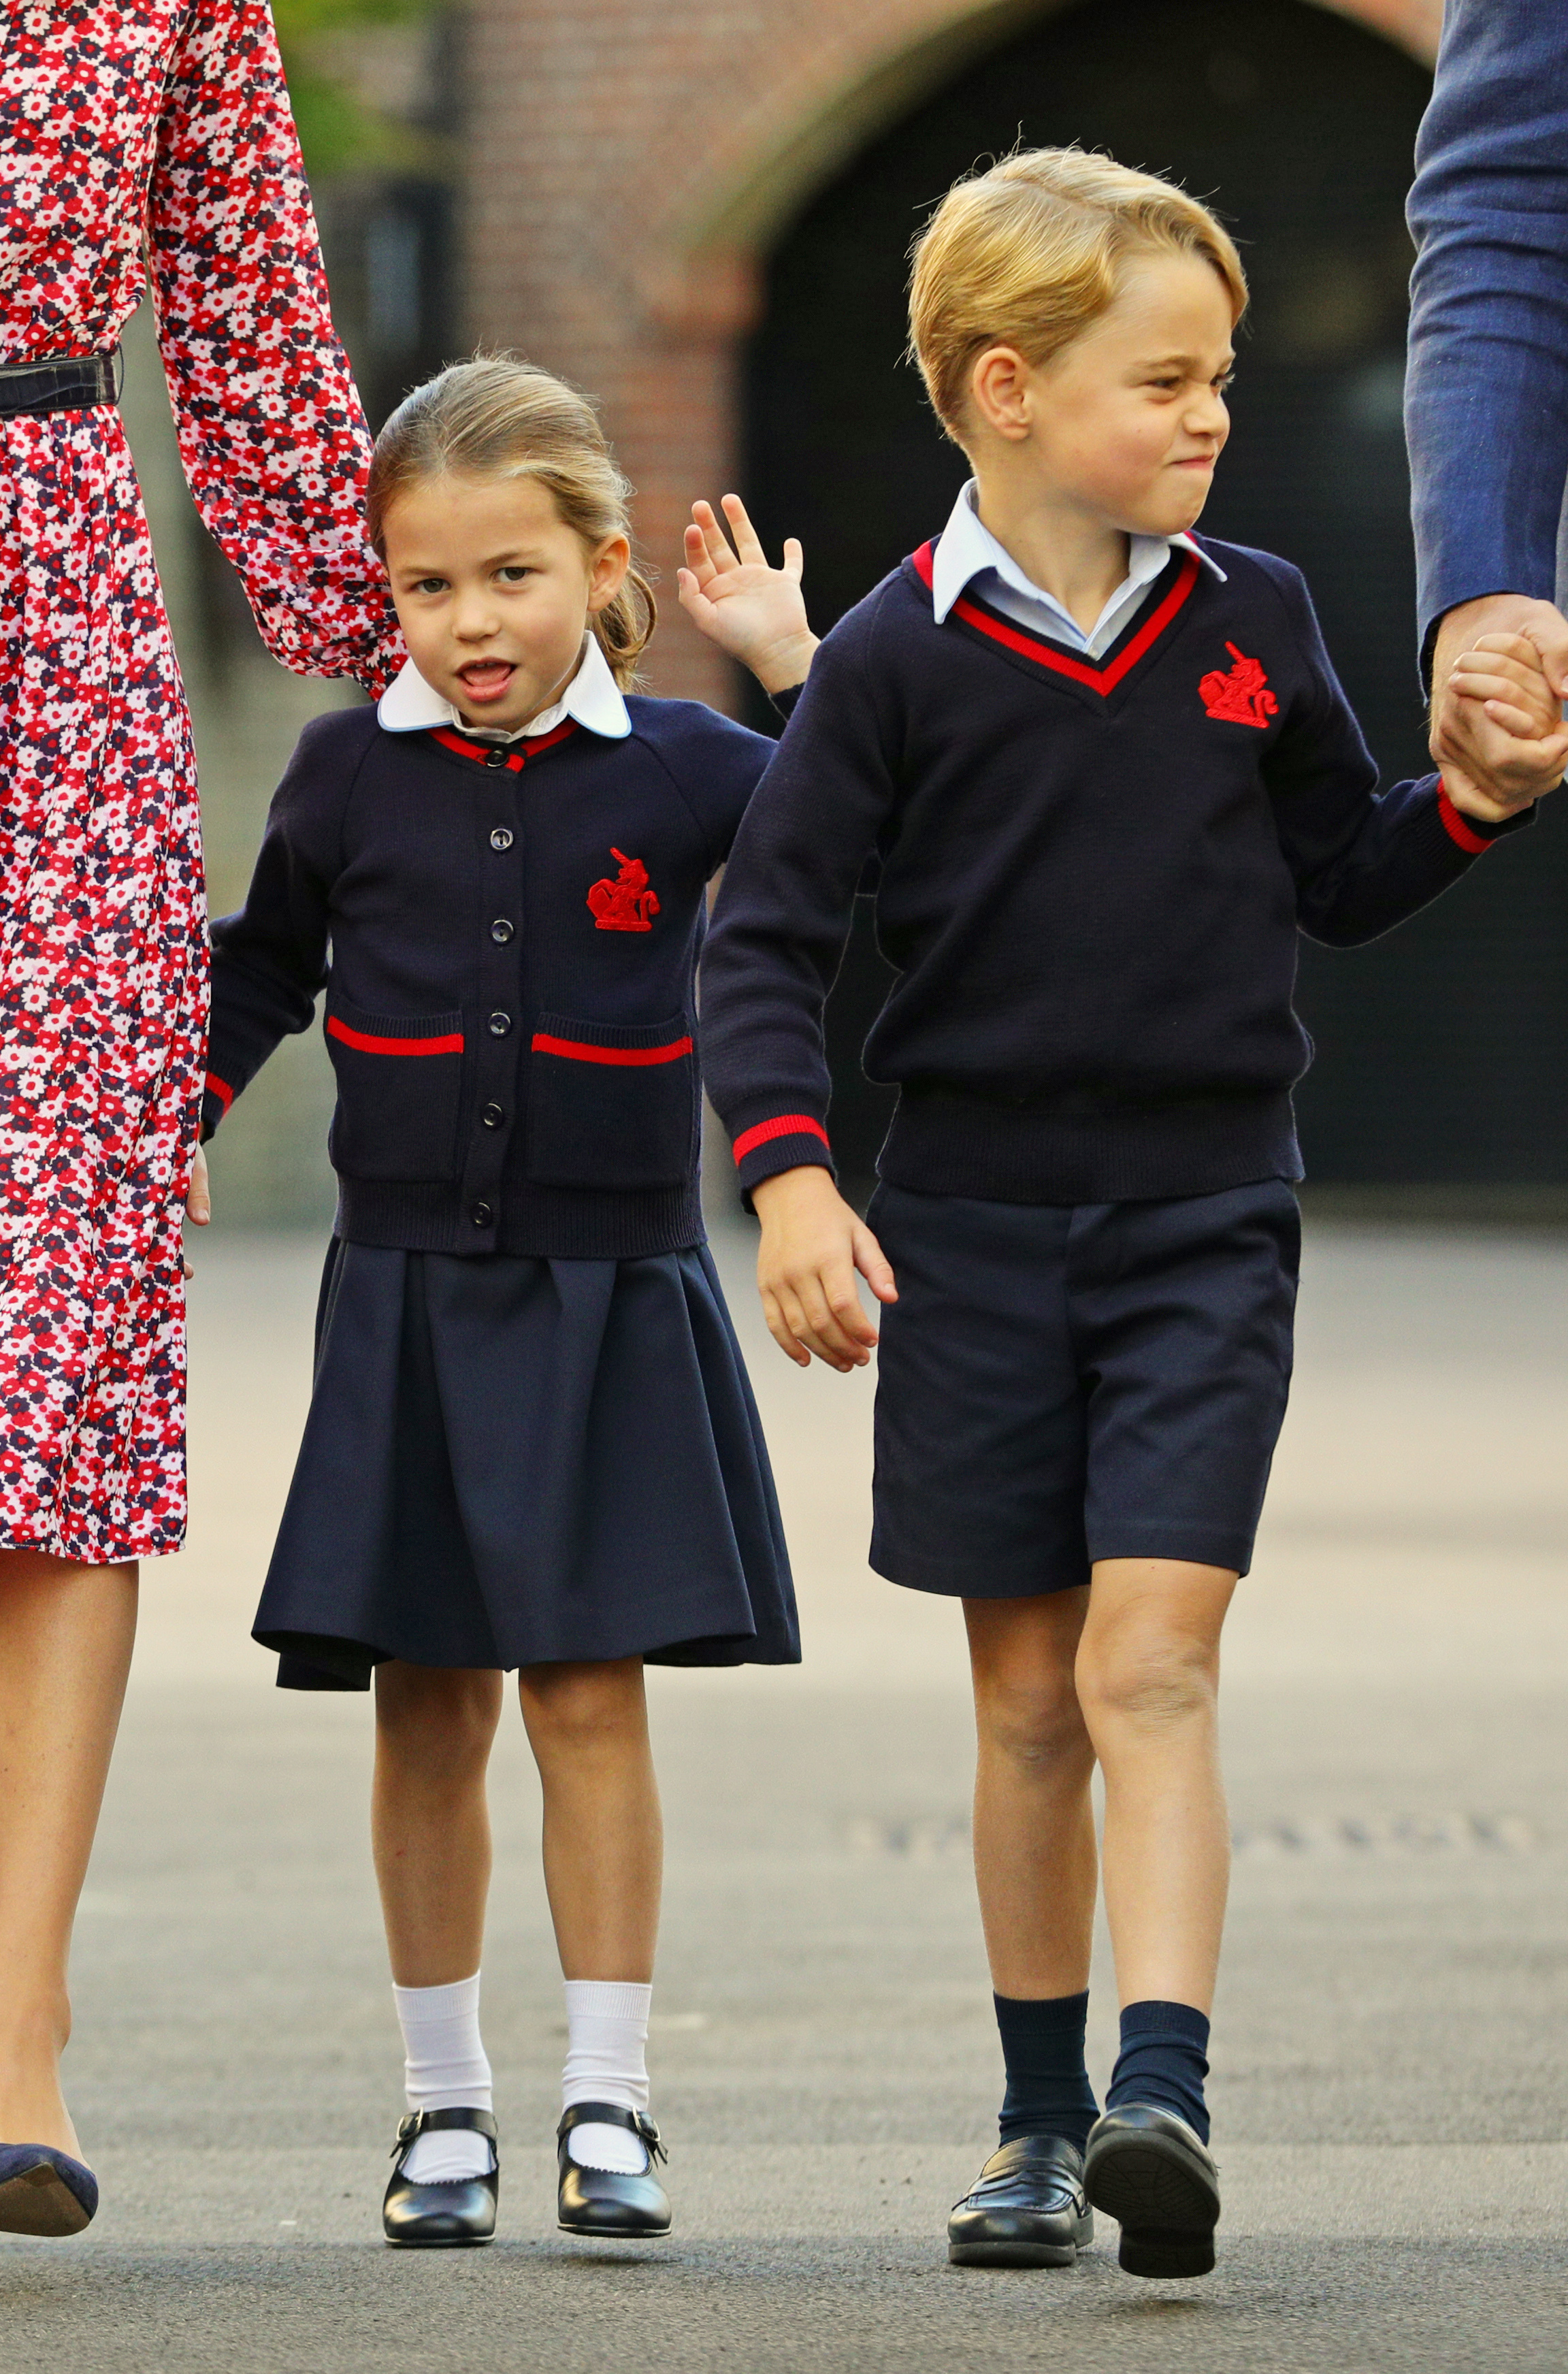 <p>Princess Charlotte -- who's known as "Charlotte Cambridge" among her new classmates -- arrived for her first day of school at Thomas's Battersea in London alongside big brother Prince George and their parents, <a href="https://www.wonderwall.com/celebrity/profiles/overview/duchess-kate-1356.article">Duchess Kate</a> and <a href="https://www.wonderwall.com/celebrity/profiles/overview/prince-william-482.article">Prince William</a>, on Sept. 5, 2019.</p>